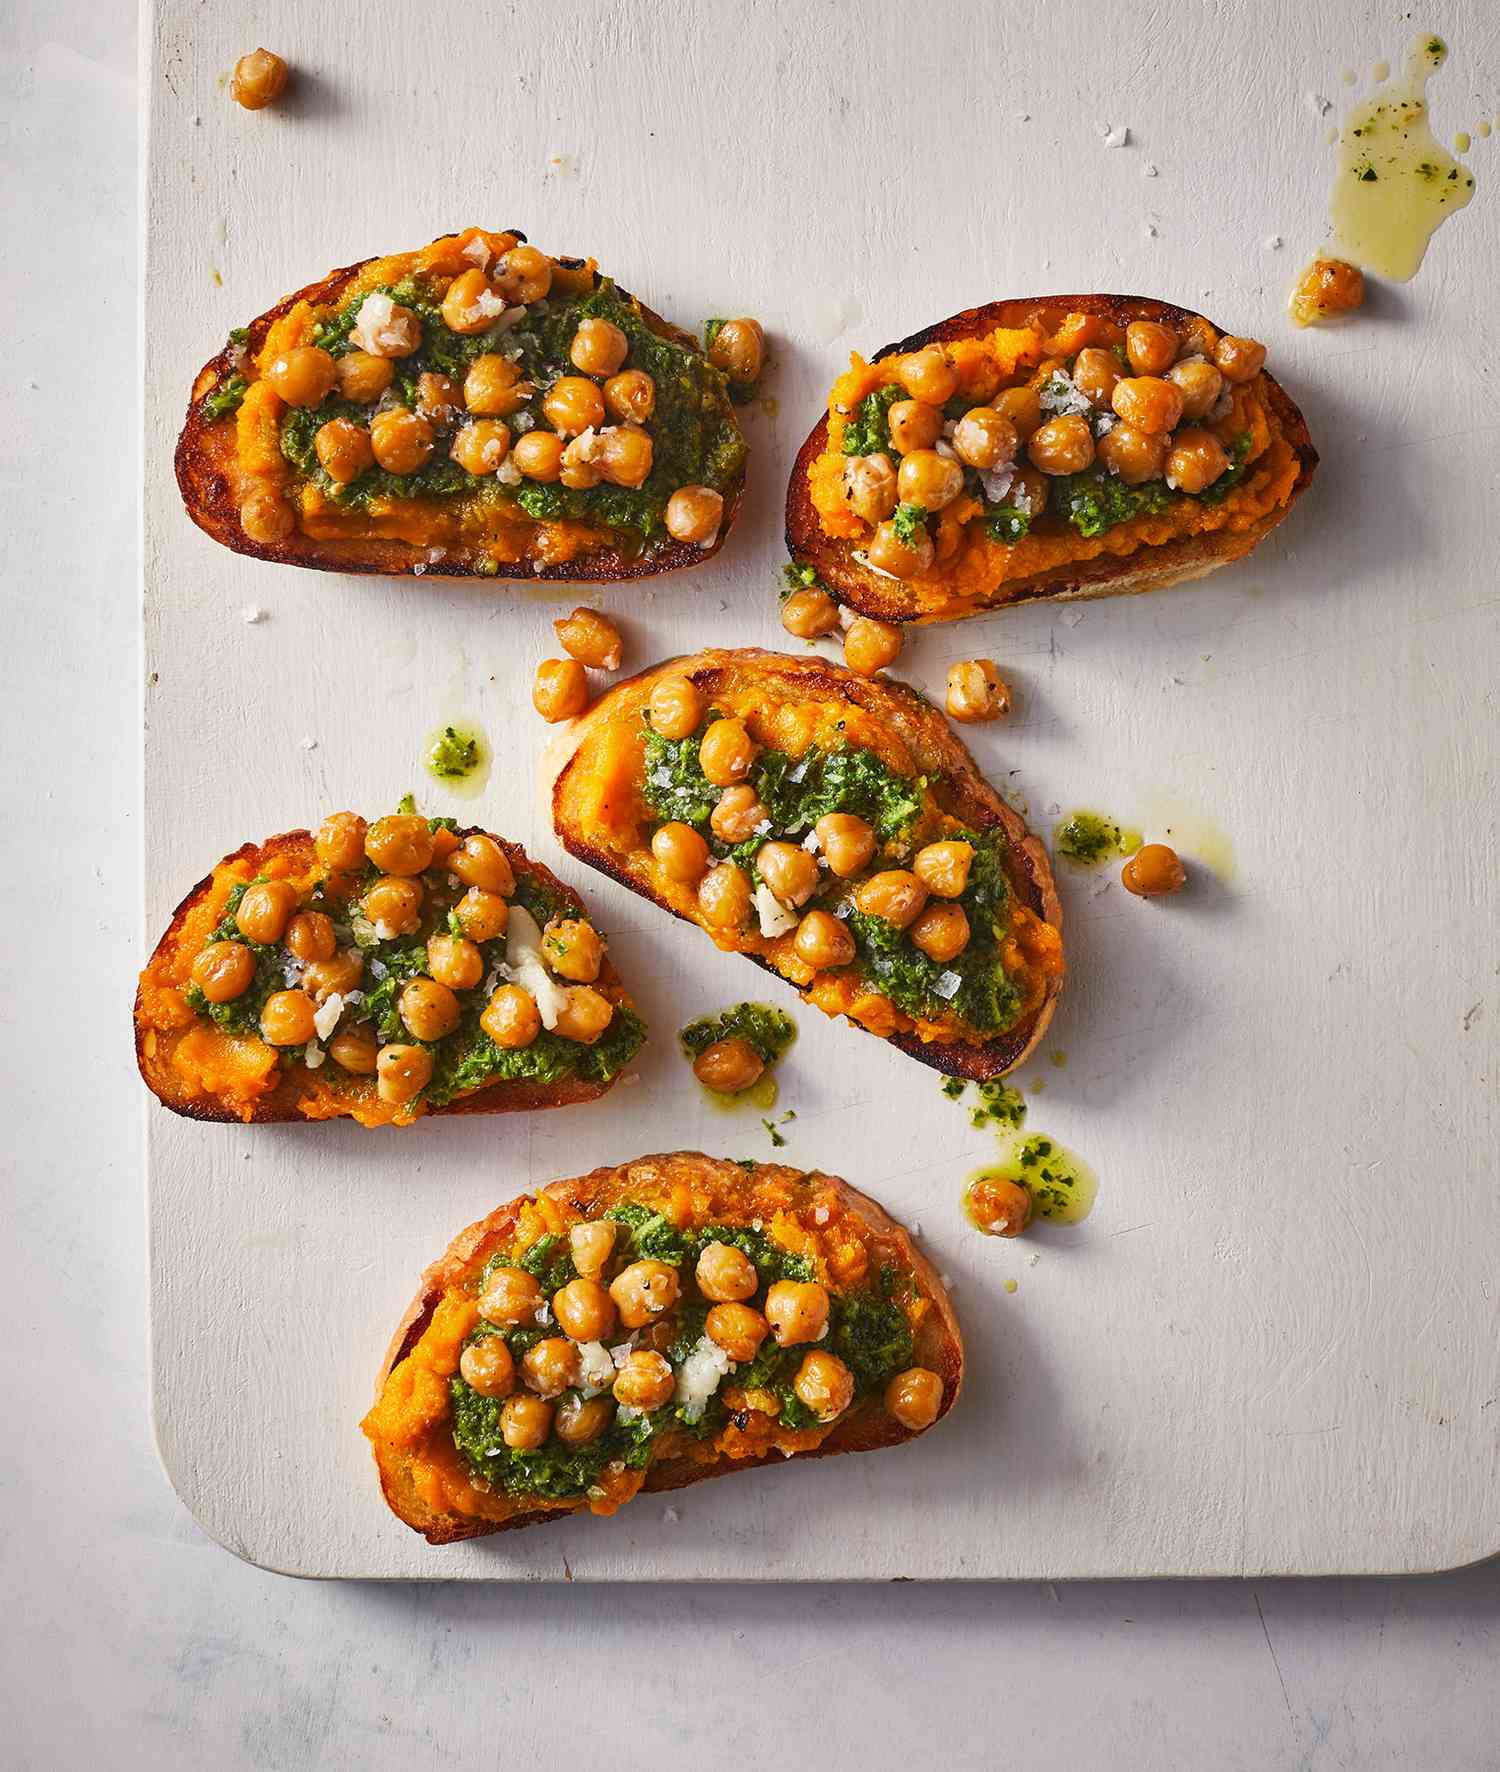 Easy Dinner Recipes: Garlic Toast With Squash, Pesto, and Olive-Oil Braised Chickpeas